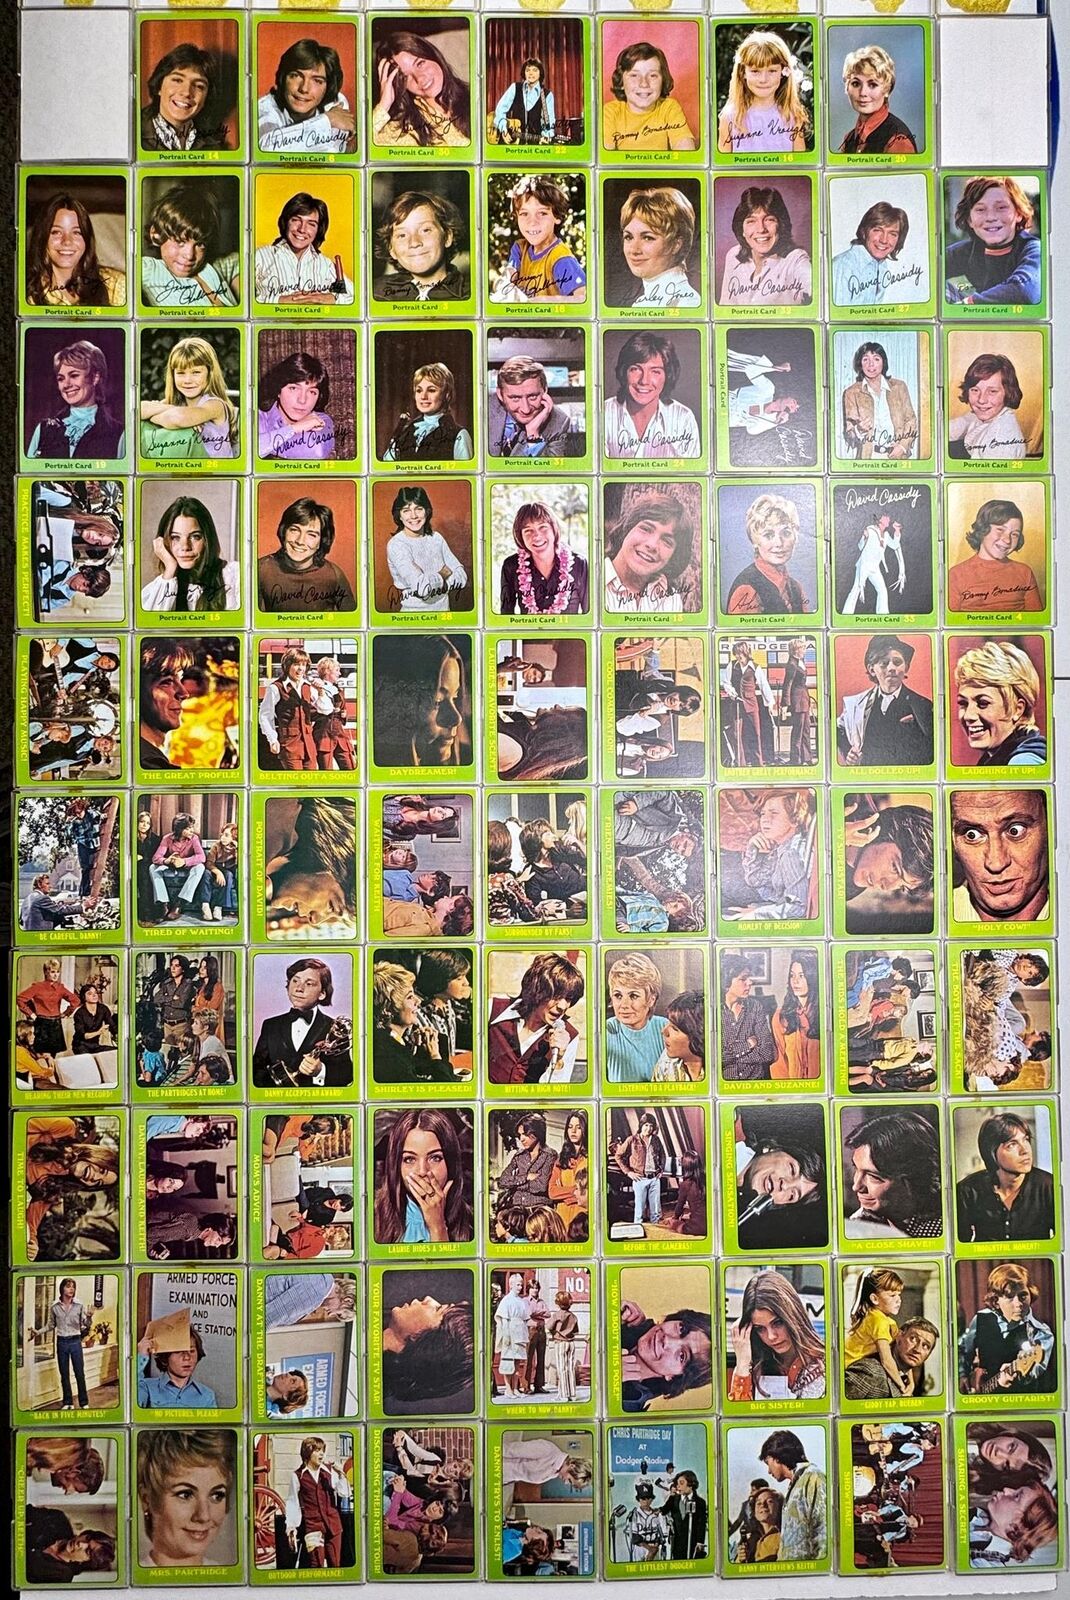 1971 Topps The Partridge Family Green Series 3 Complete (88) Trading Card Set